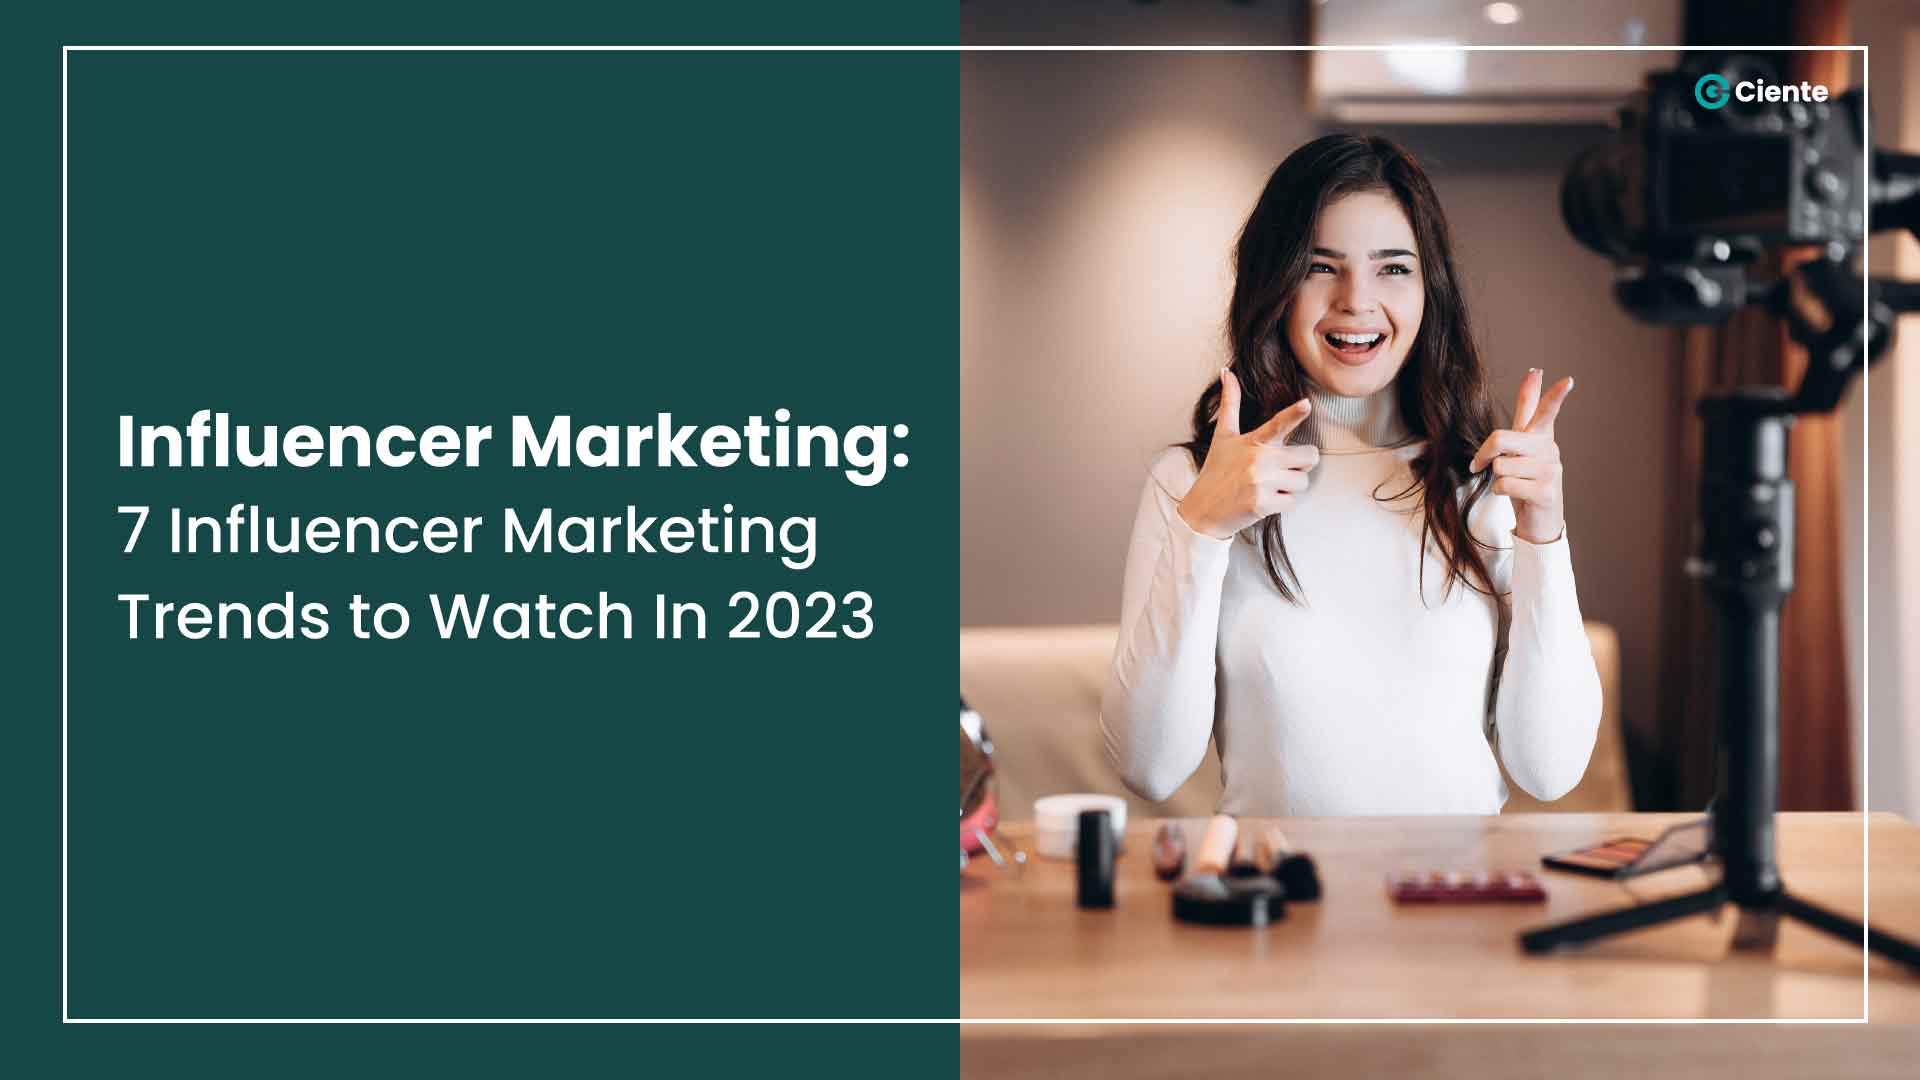 Influencer Marketing - 7 Influencer Marketing Trends to Watch In 2023